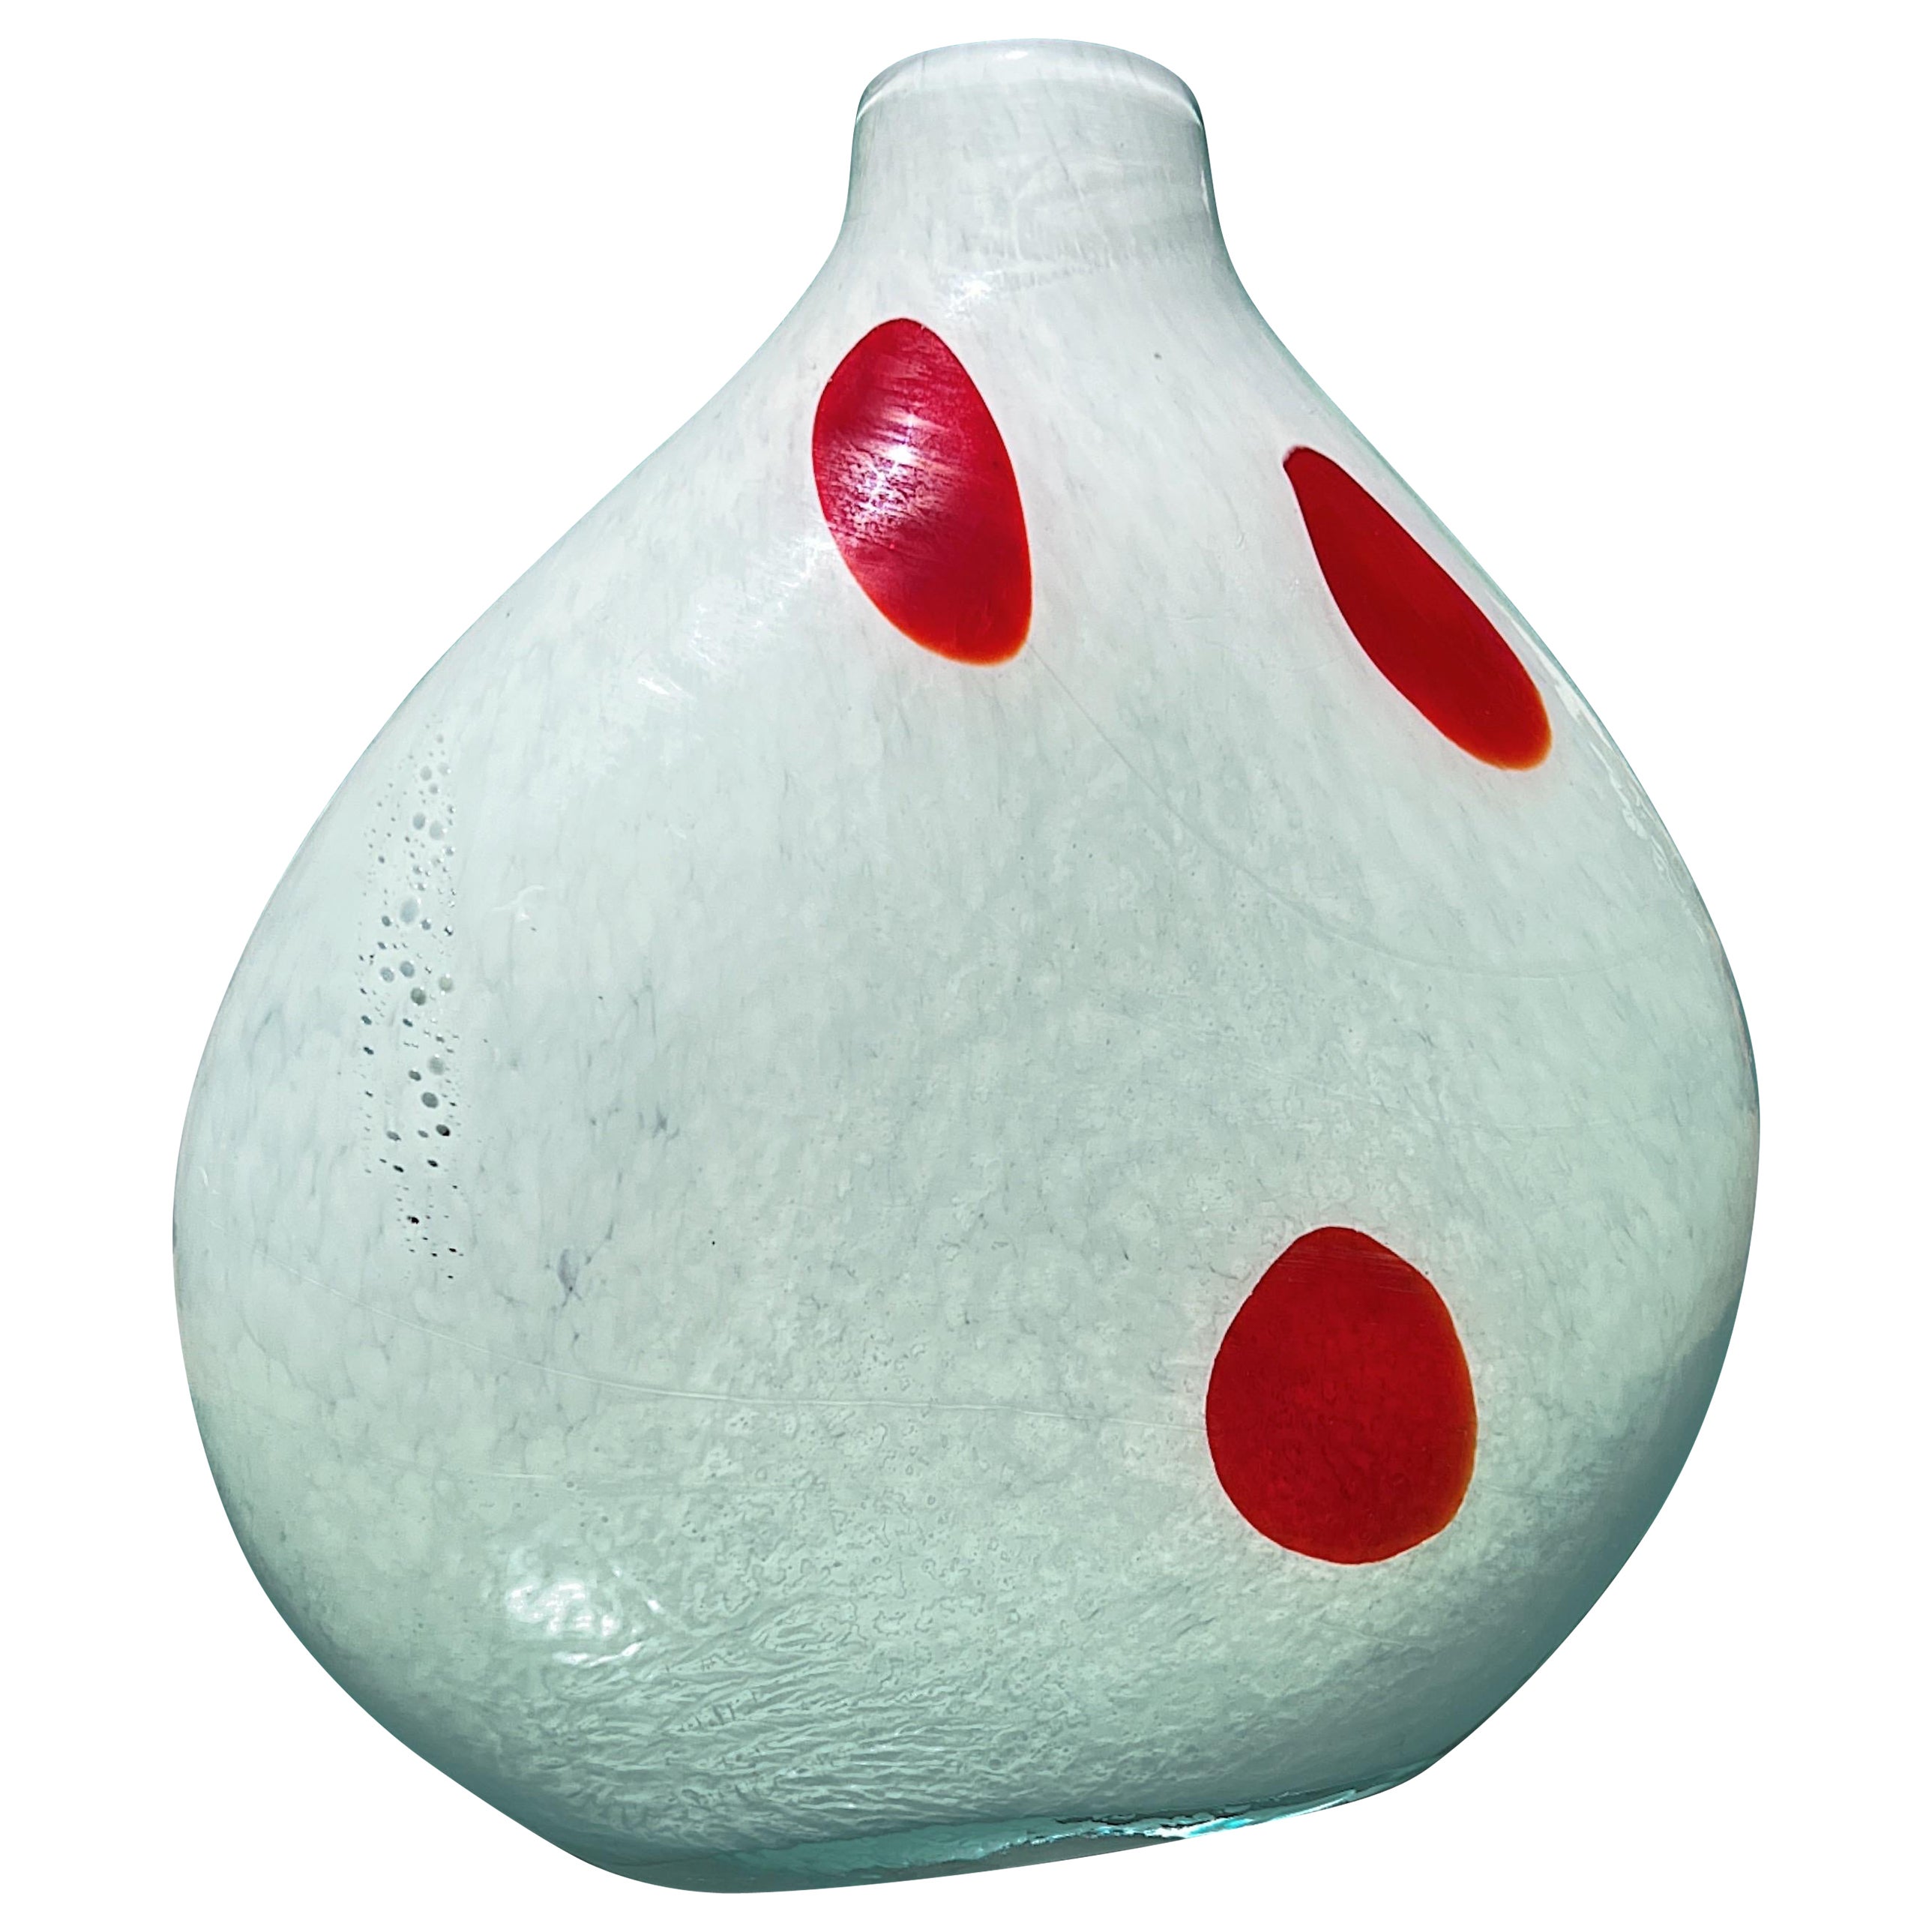 Murano glass vase designed by Dino Martens, 1940 For Sale at 1stDibs